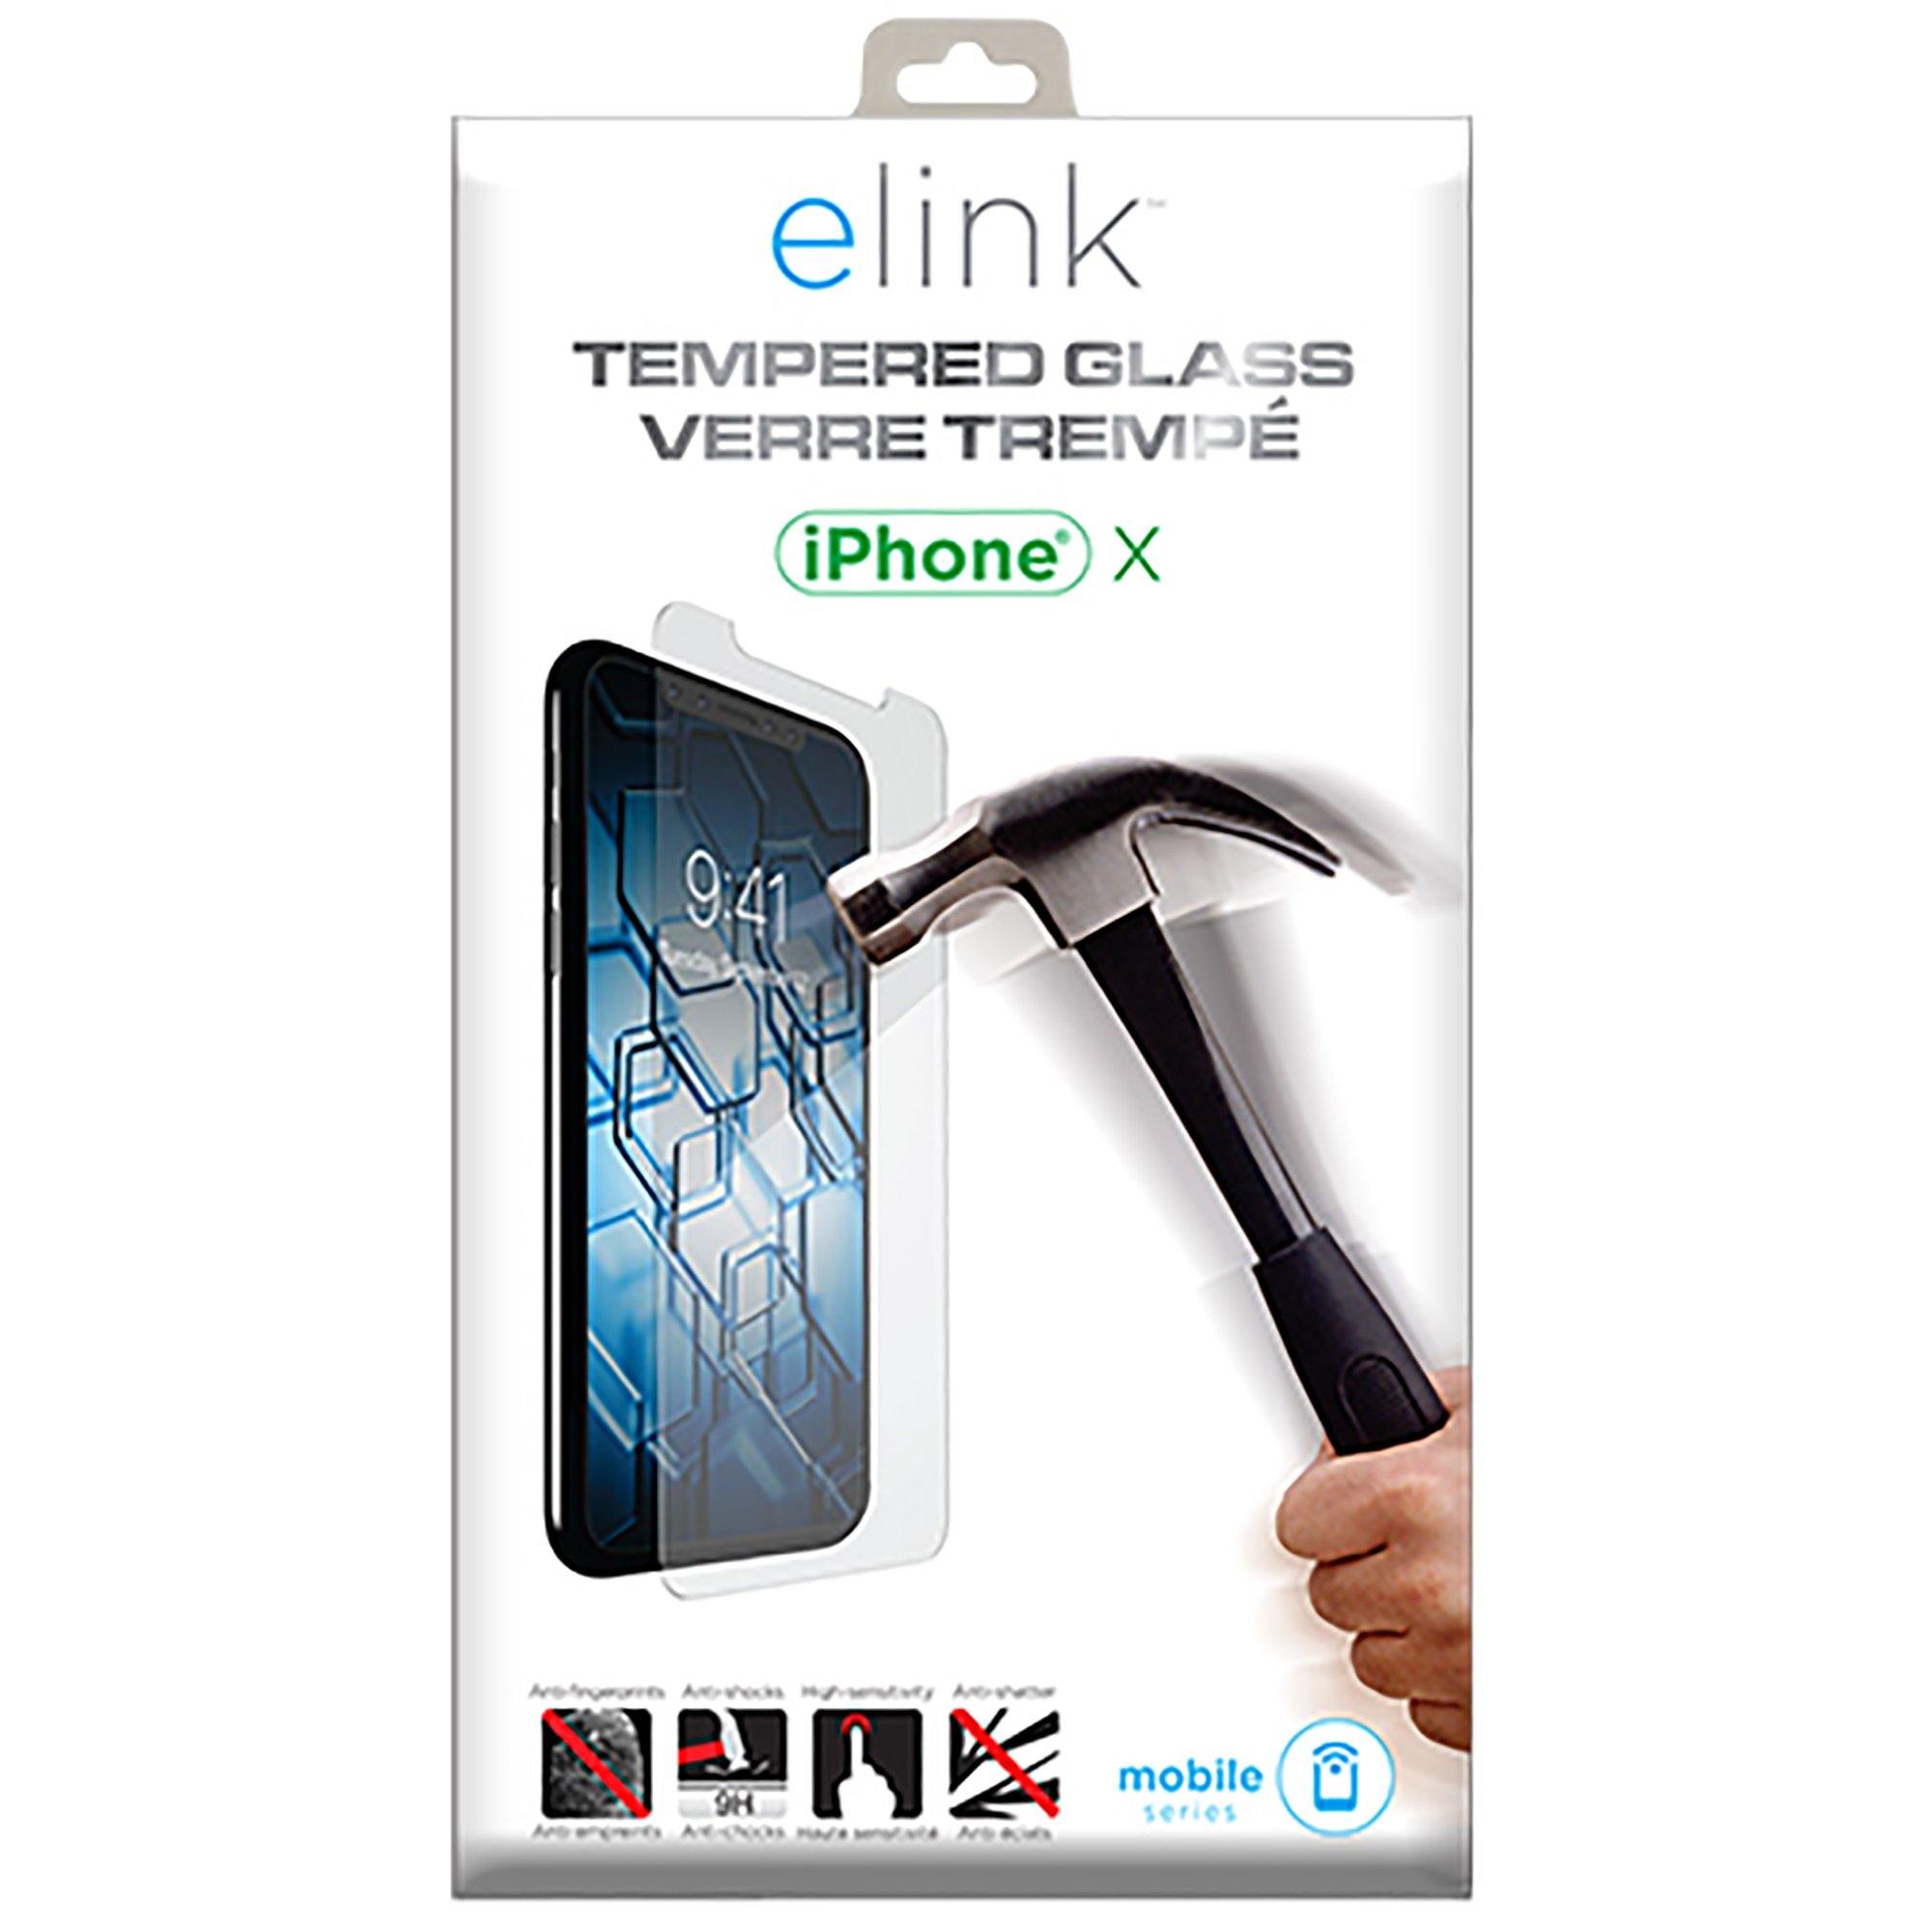 Tempered Glass Film For Iphone X - Dollar Max Depot